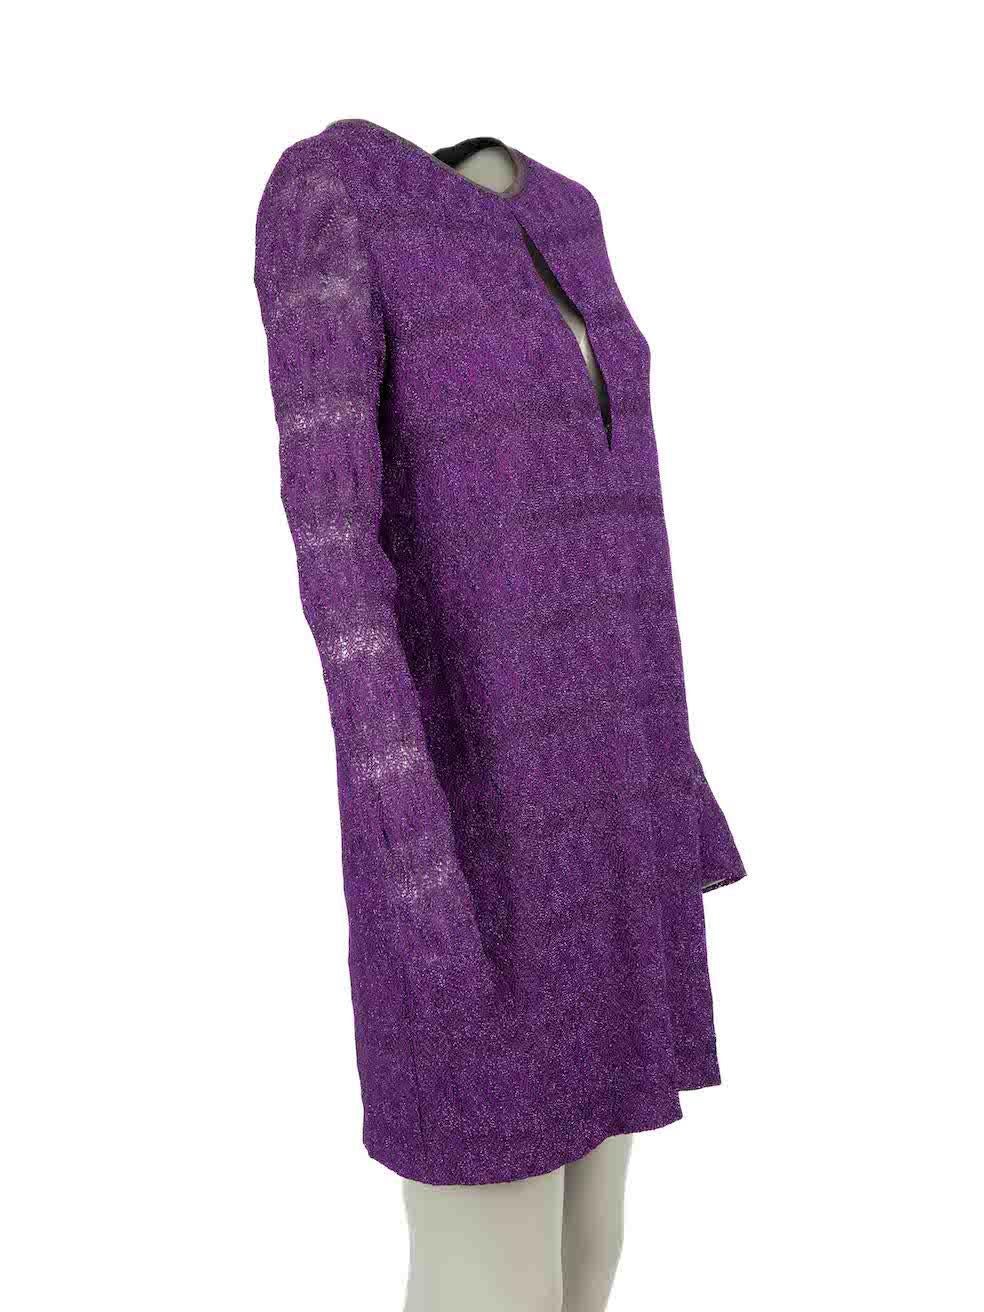 CONDITION is Very good. Hardly any visible wear to dress is evident on this used Missoni designer resale item. Please note that the brand label has been removed.
 
Details
Purple
Glitter
Mini dress
Keyhole neckline
Back zip closure with snap